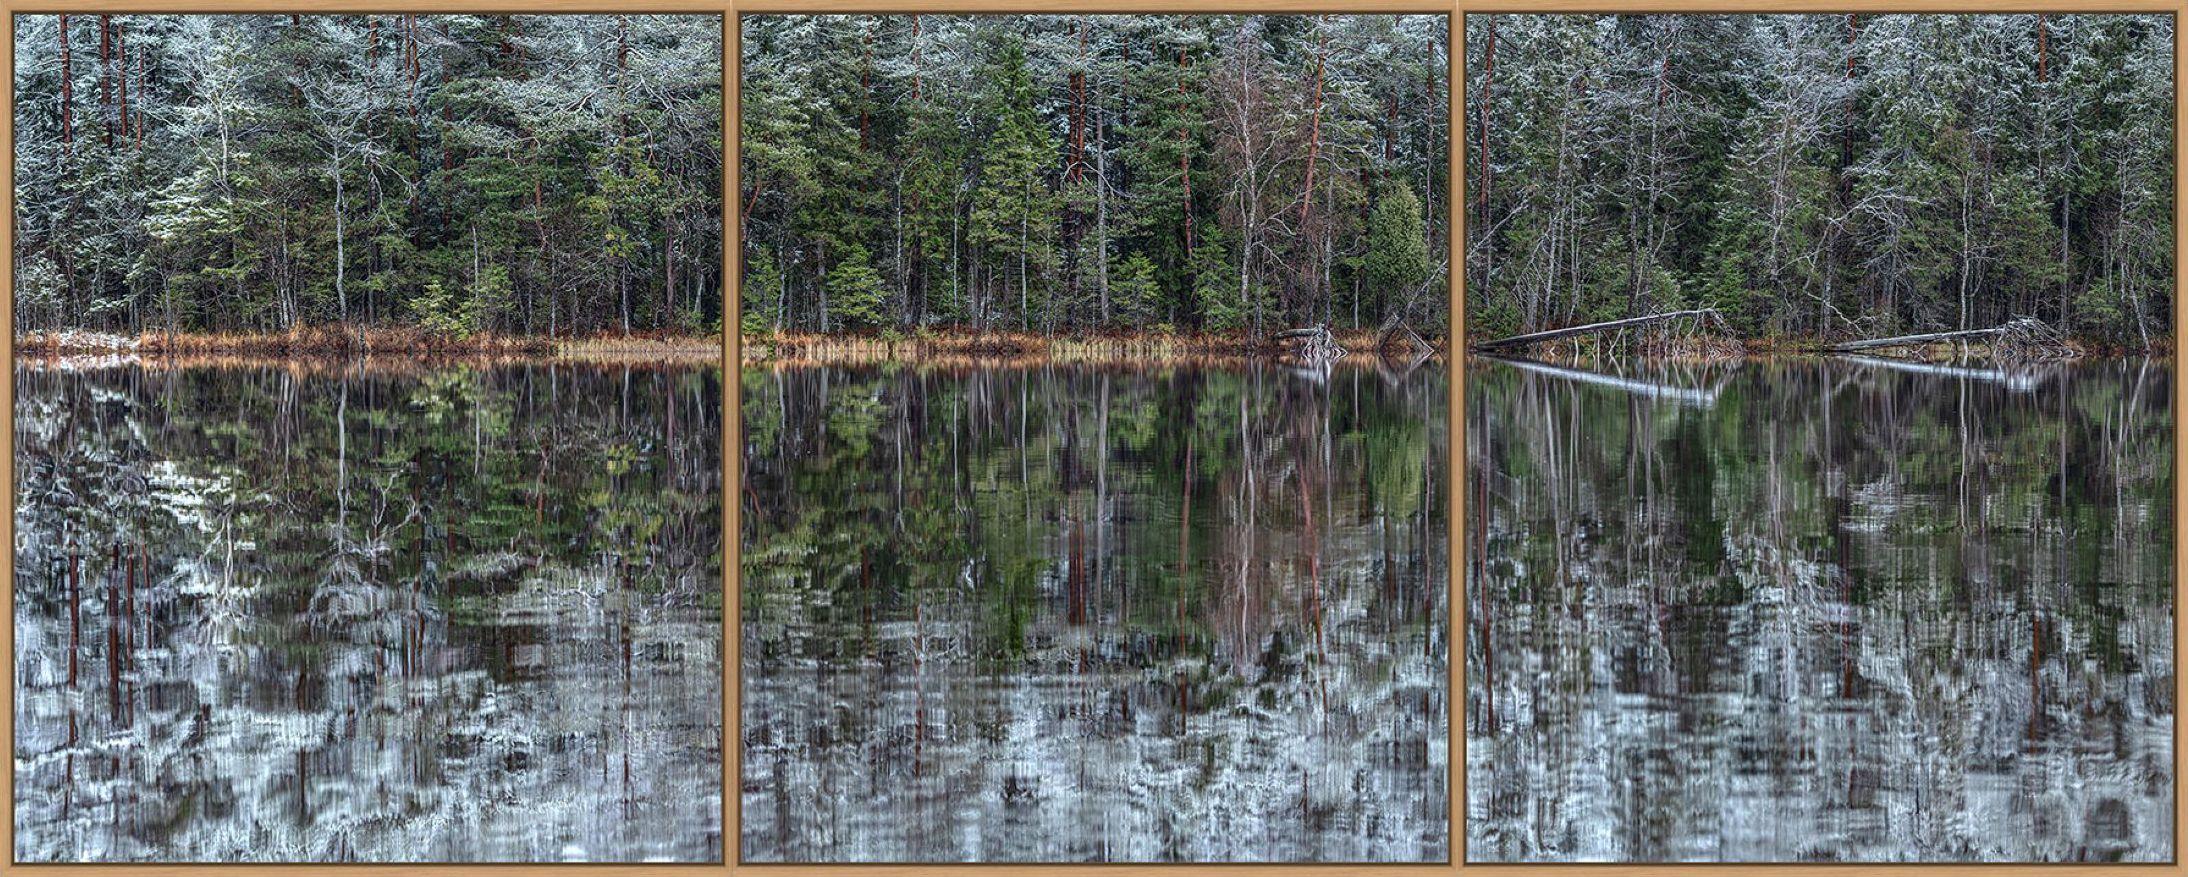 Deep Mirroring Forest 001 is a limited-edition photograph by German contemporary artist Bernhard Lang. 

This photograph is sold unframed as a print only. It is available in 6 dimensions:
*40 × 100 cm (15.7 × 39.4 in), edition of 5 copies
*60 × 150